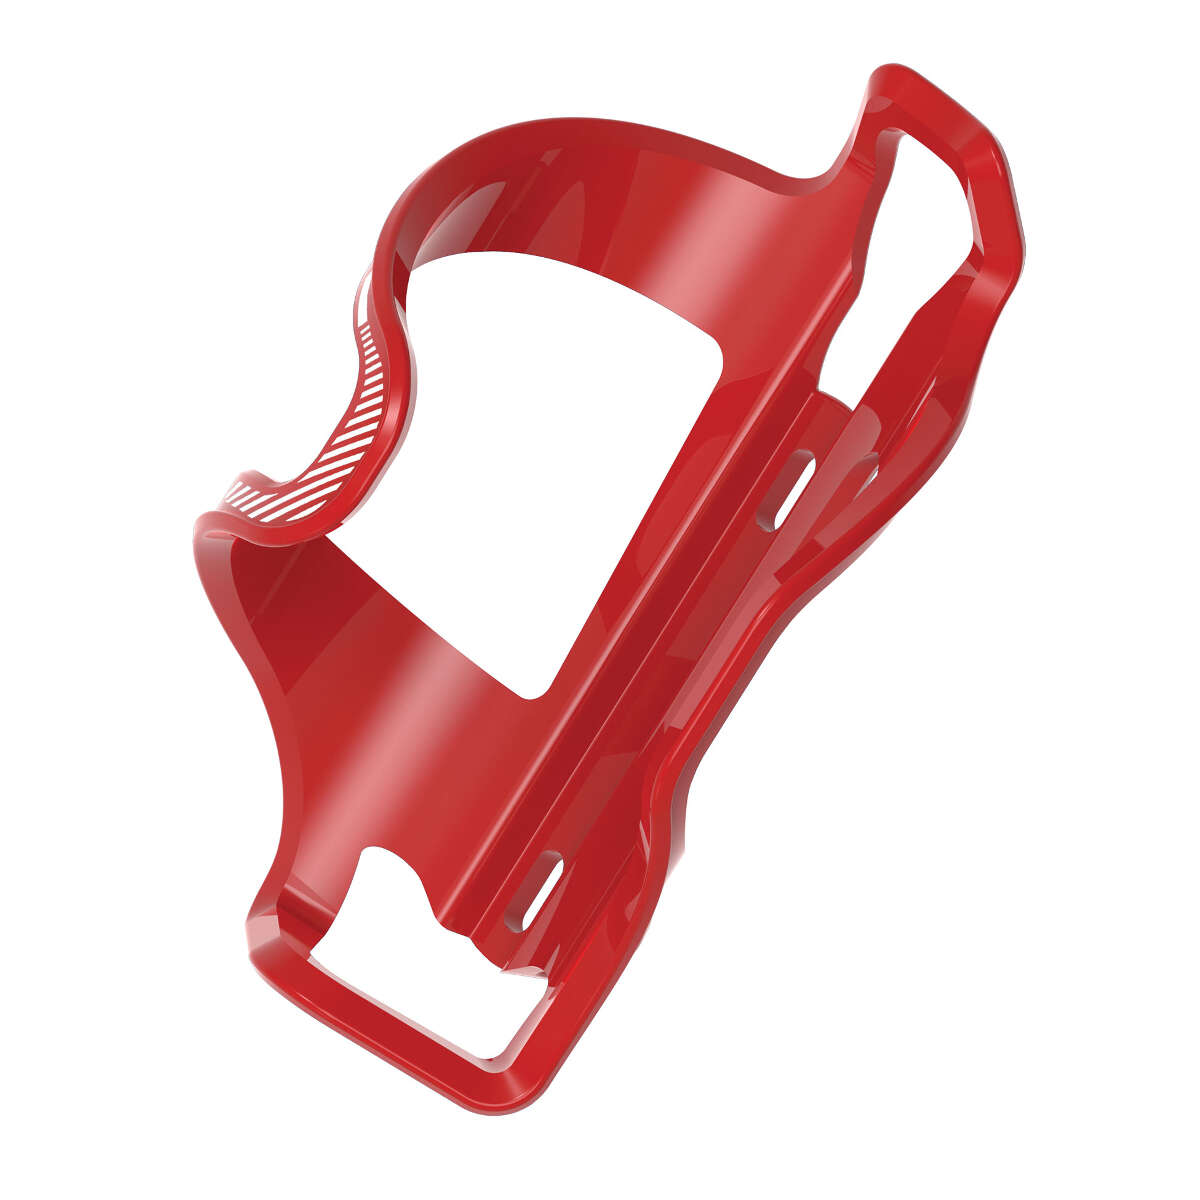 Lezyne Bottle Cage Flow Cage SL Right, Red